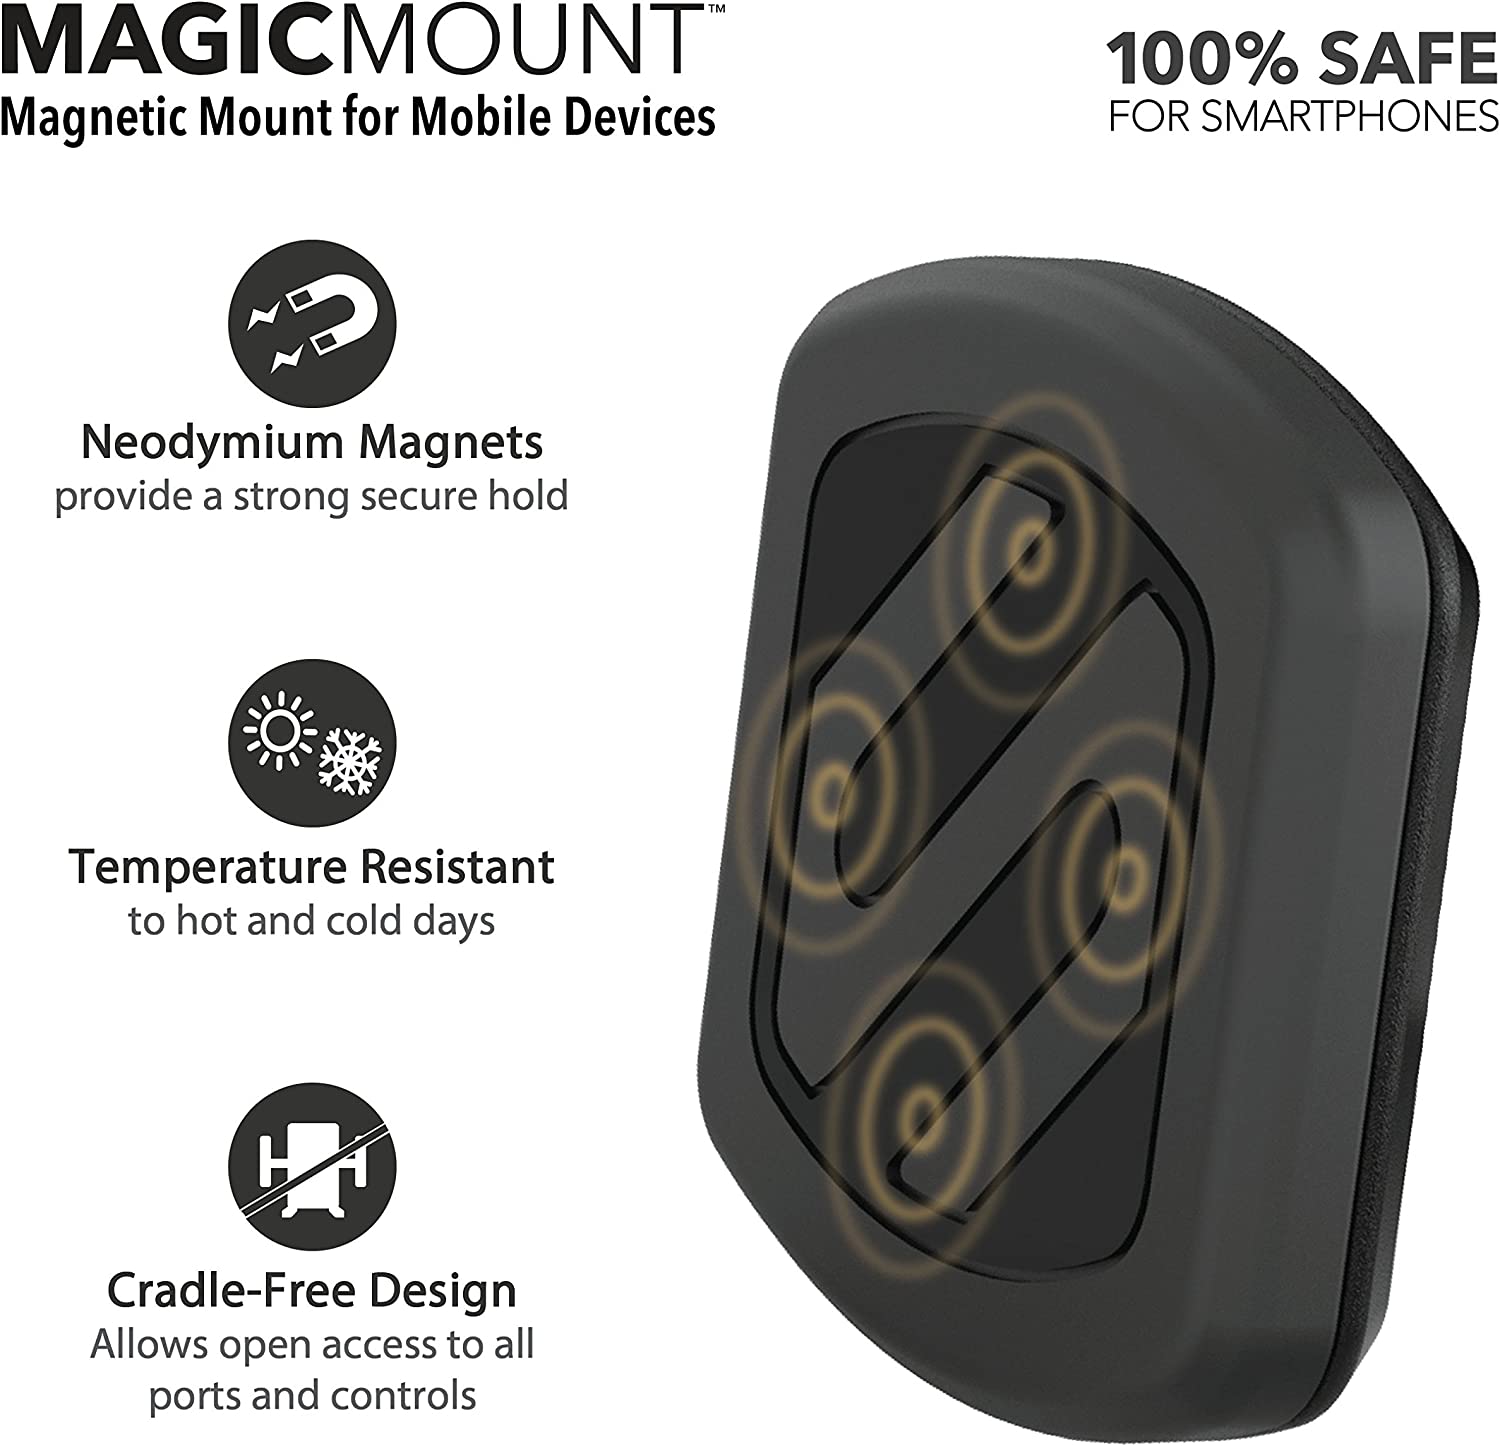 Scosche MagicMount Magnetic Suction Cup Mount for Mobile Devices and MagicMount Universal Magnetic Mount for Mobile Devices - Black